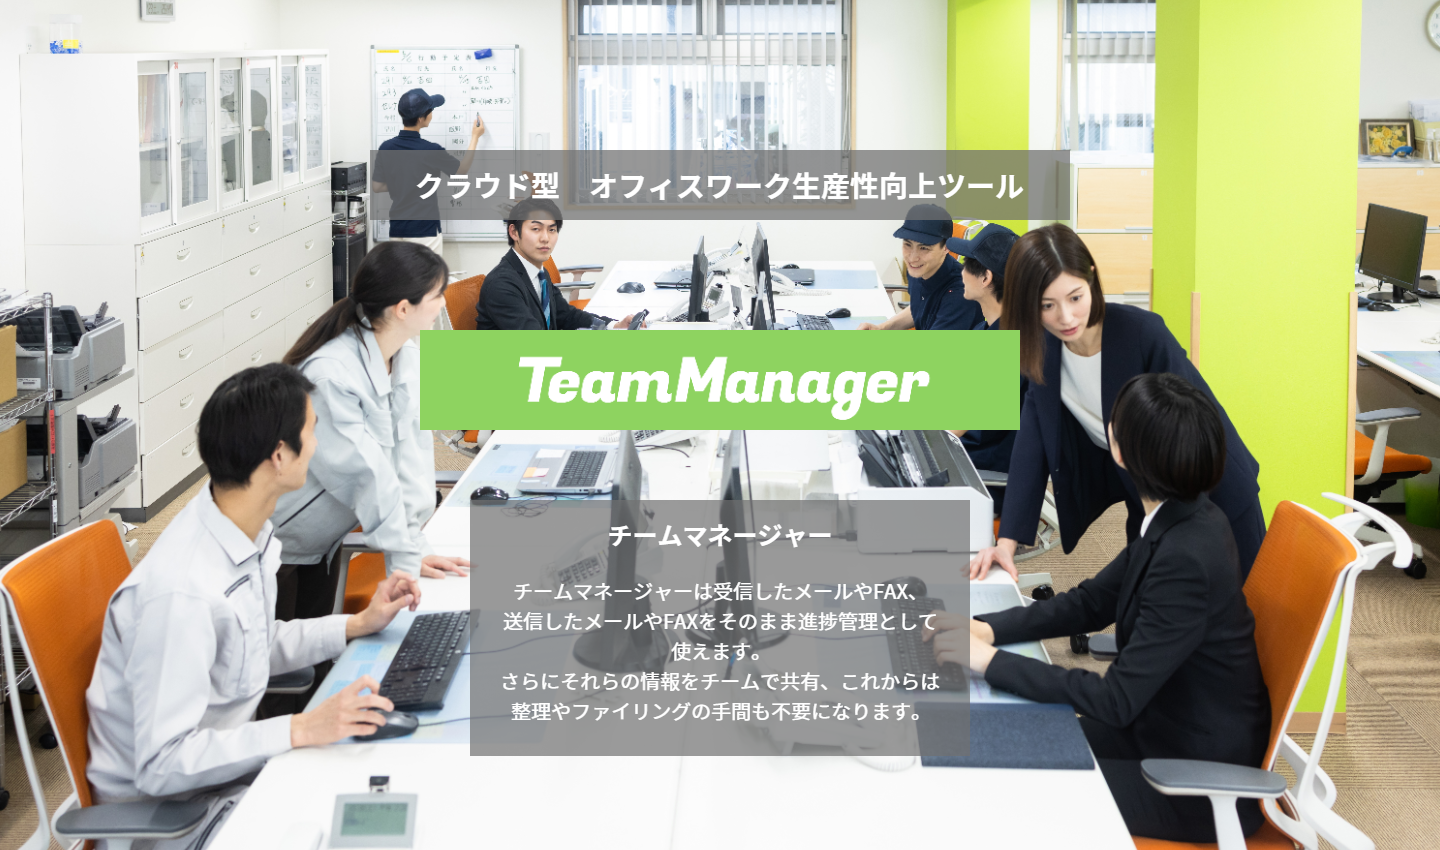 TeamManager